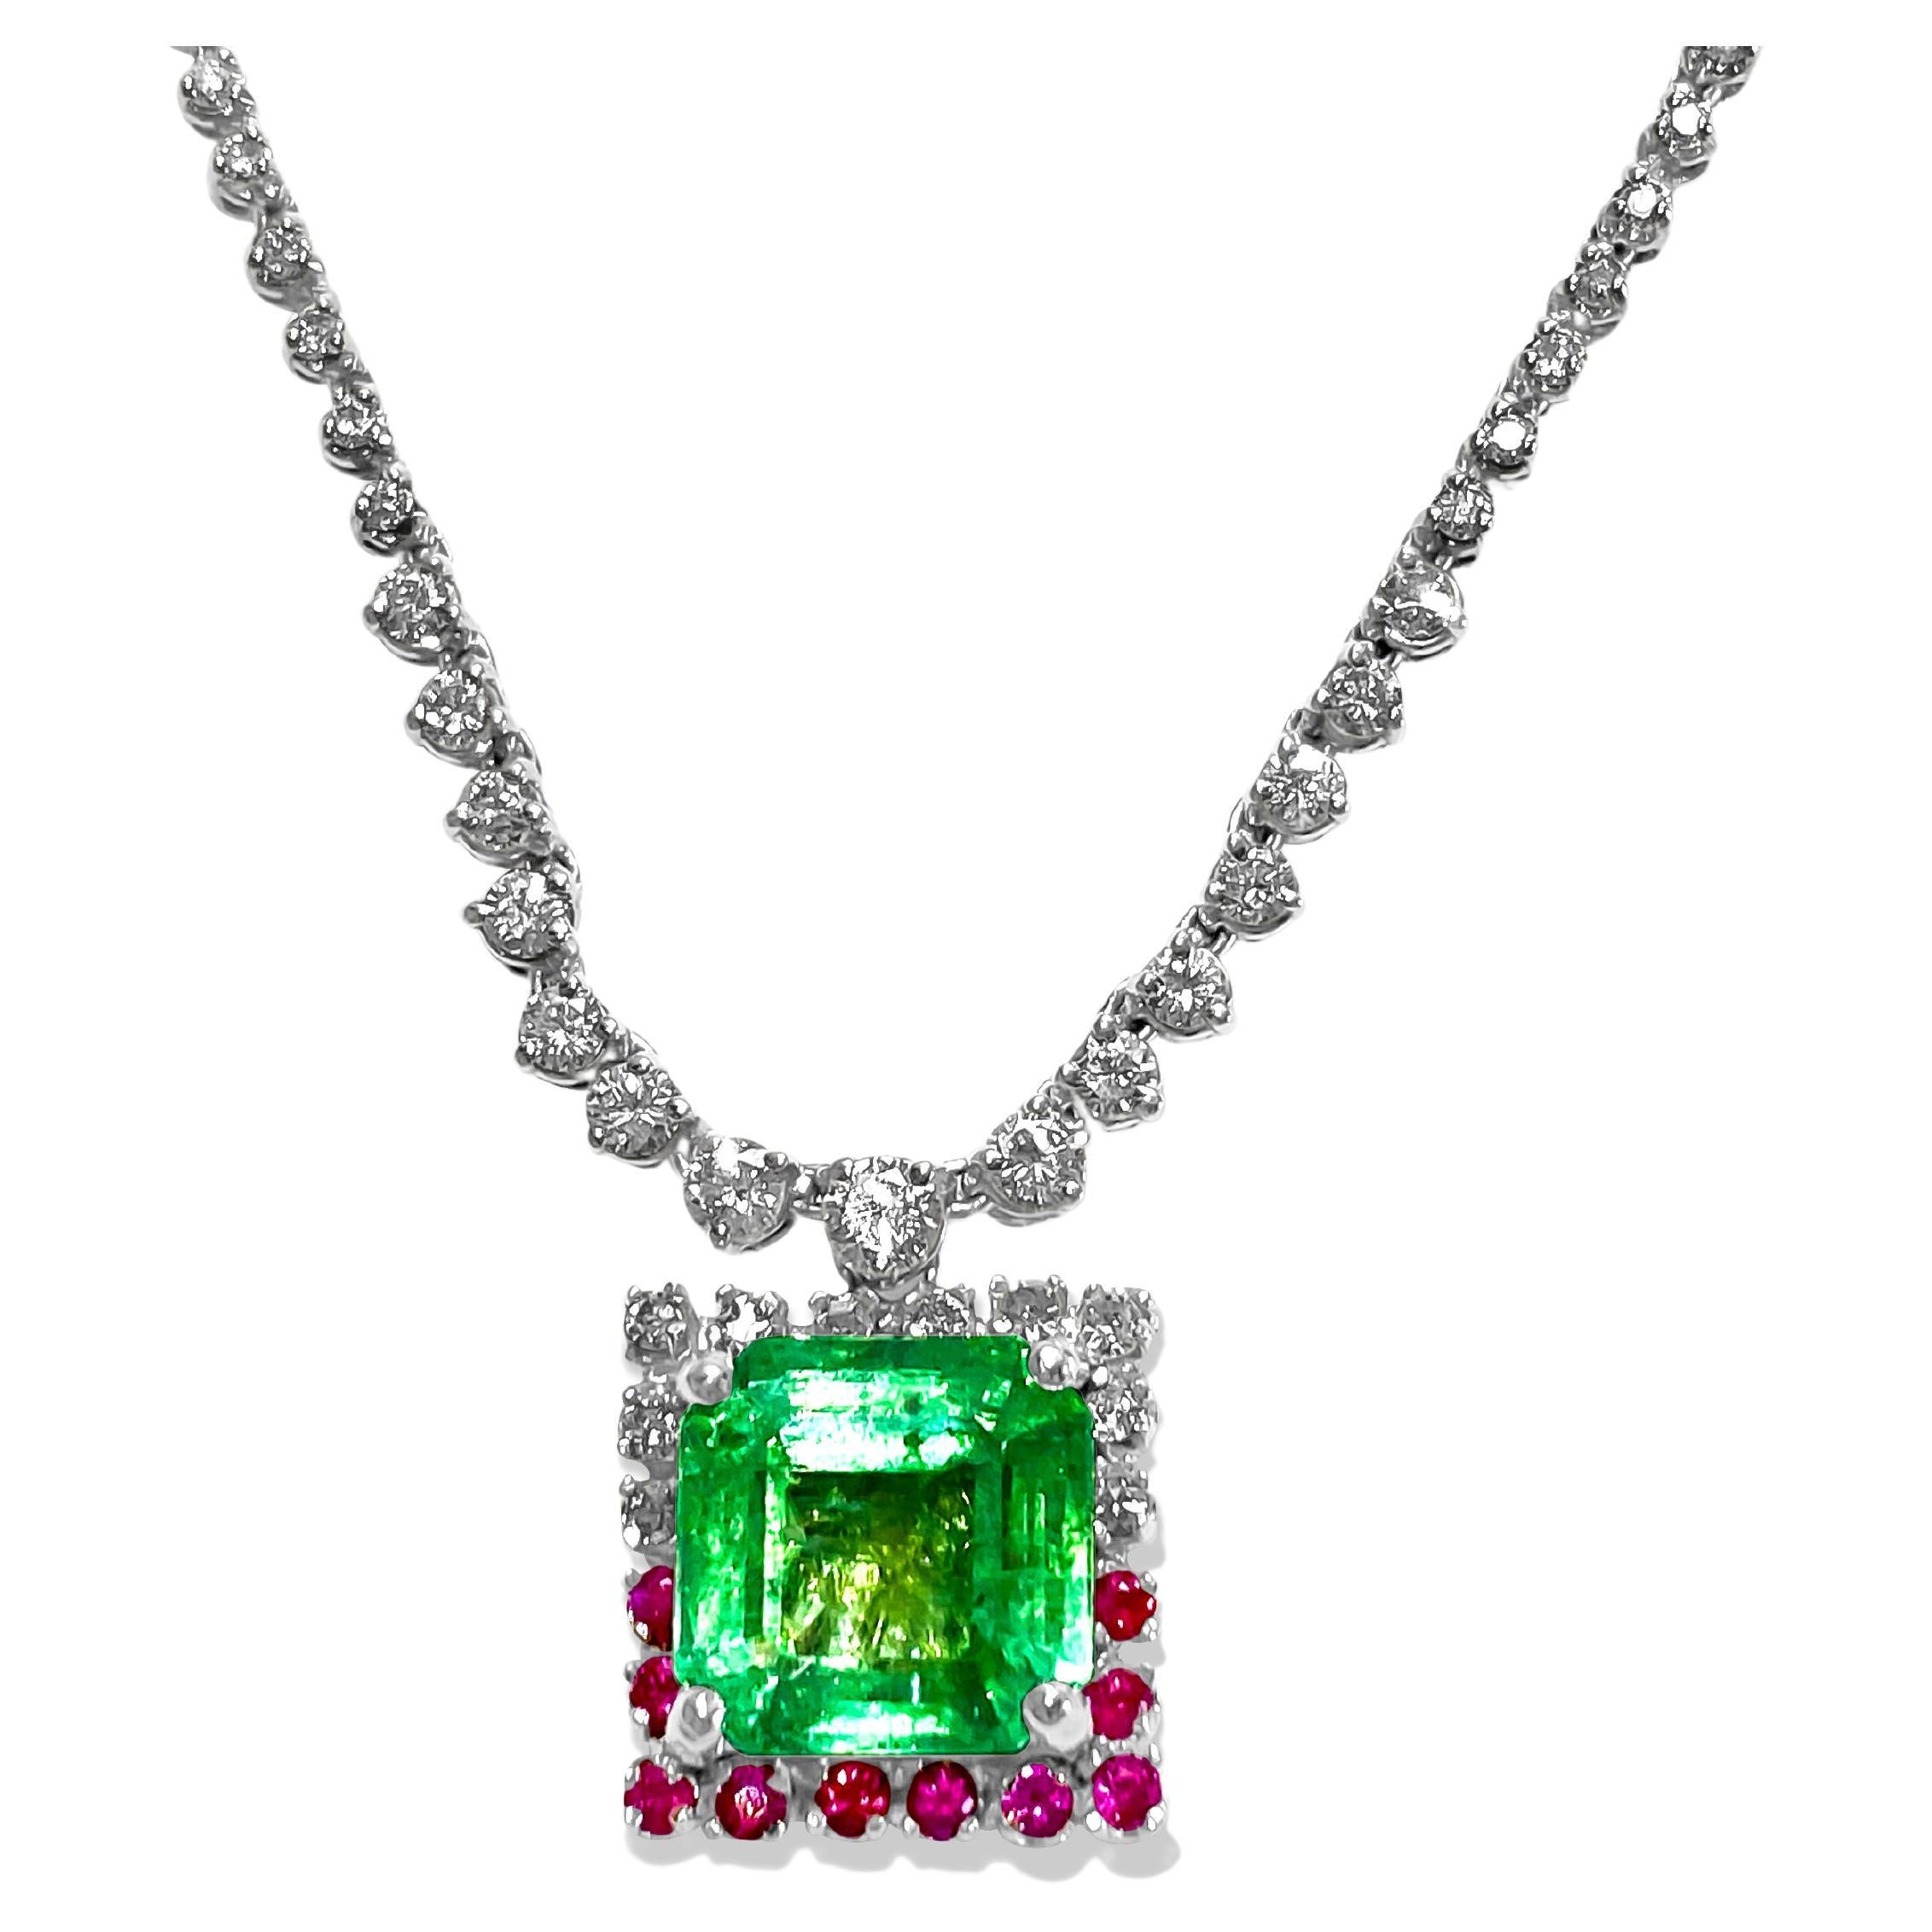 GIA Certified 11.00 Carat Colombian Emerald Ruby Diamond Necklace